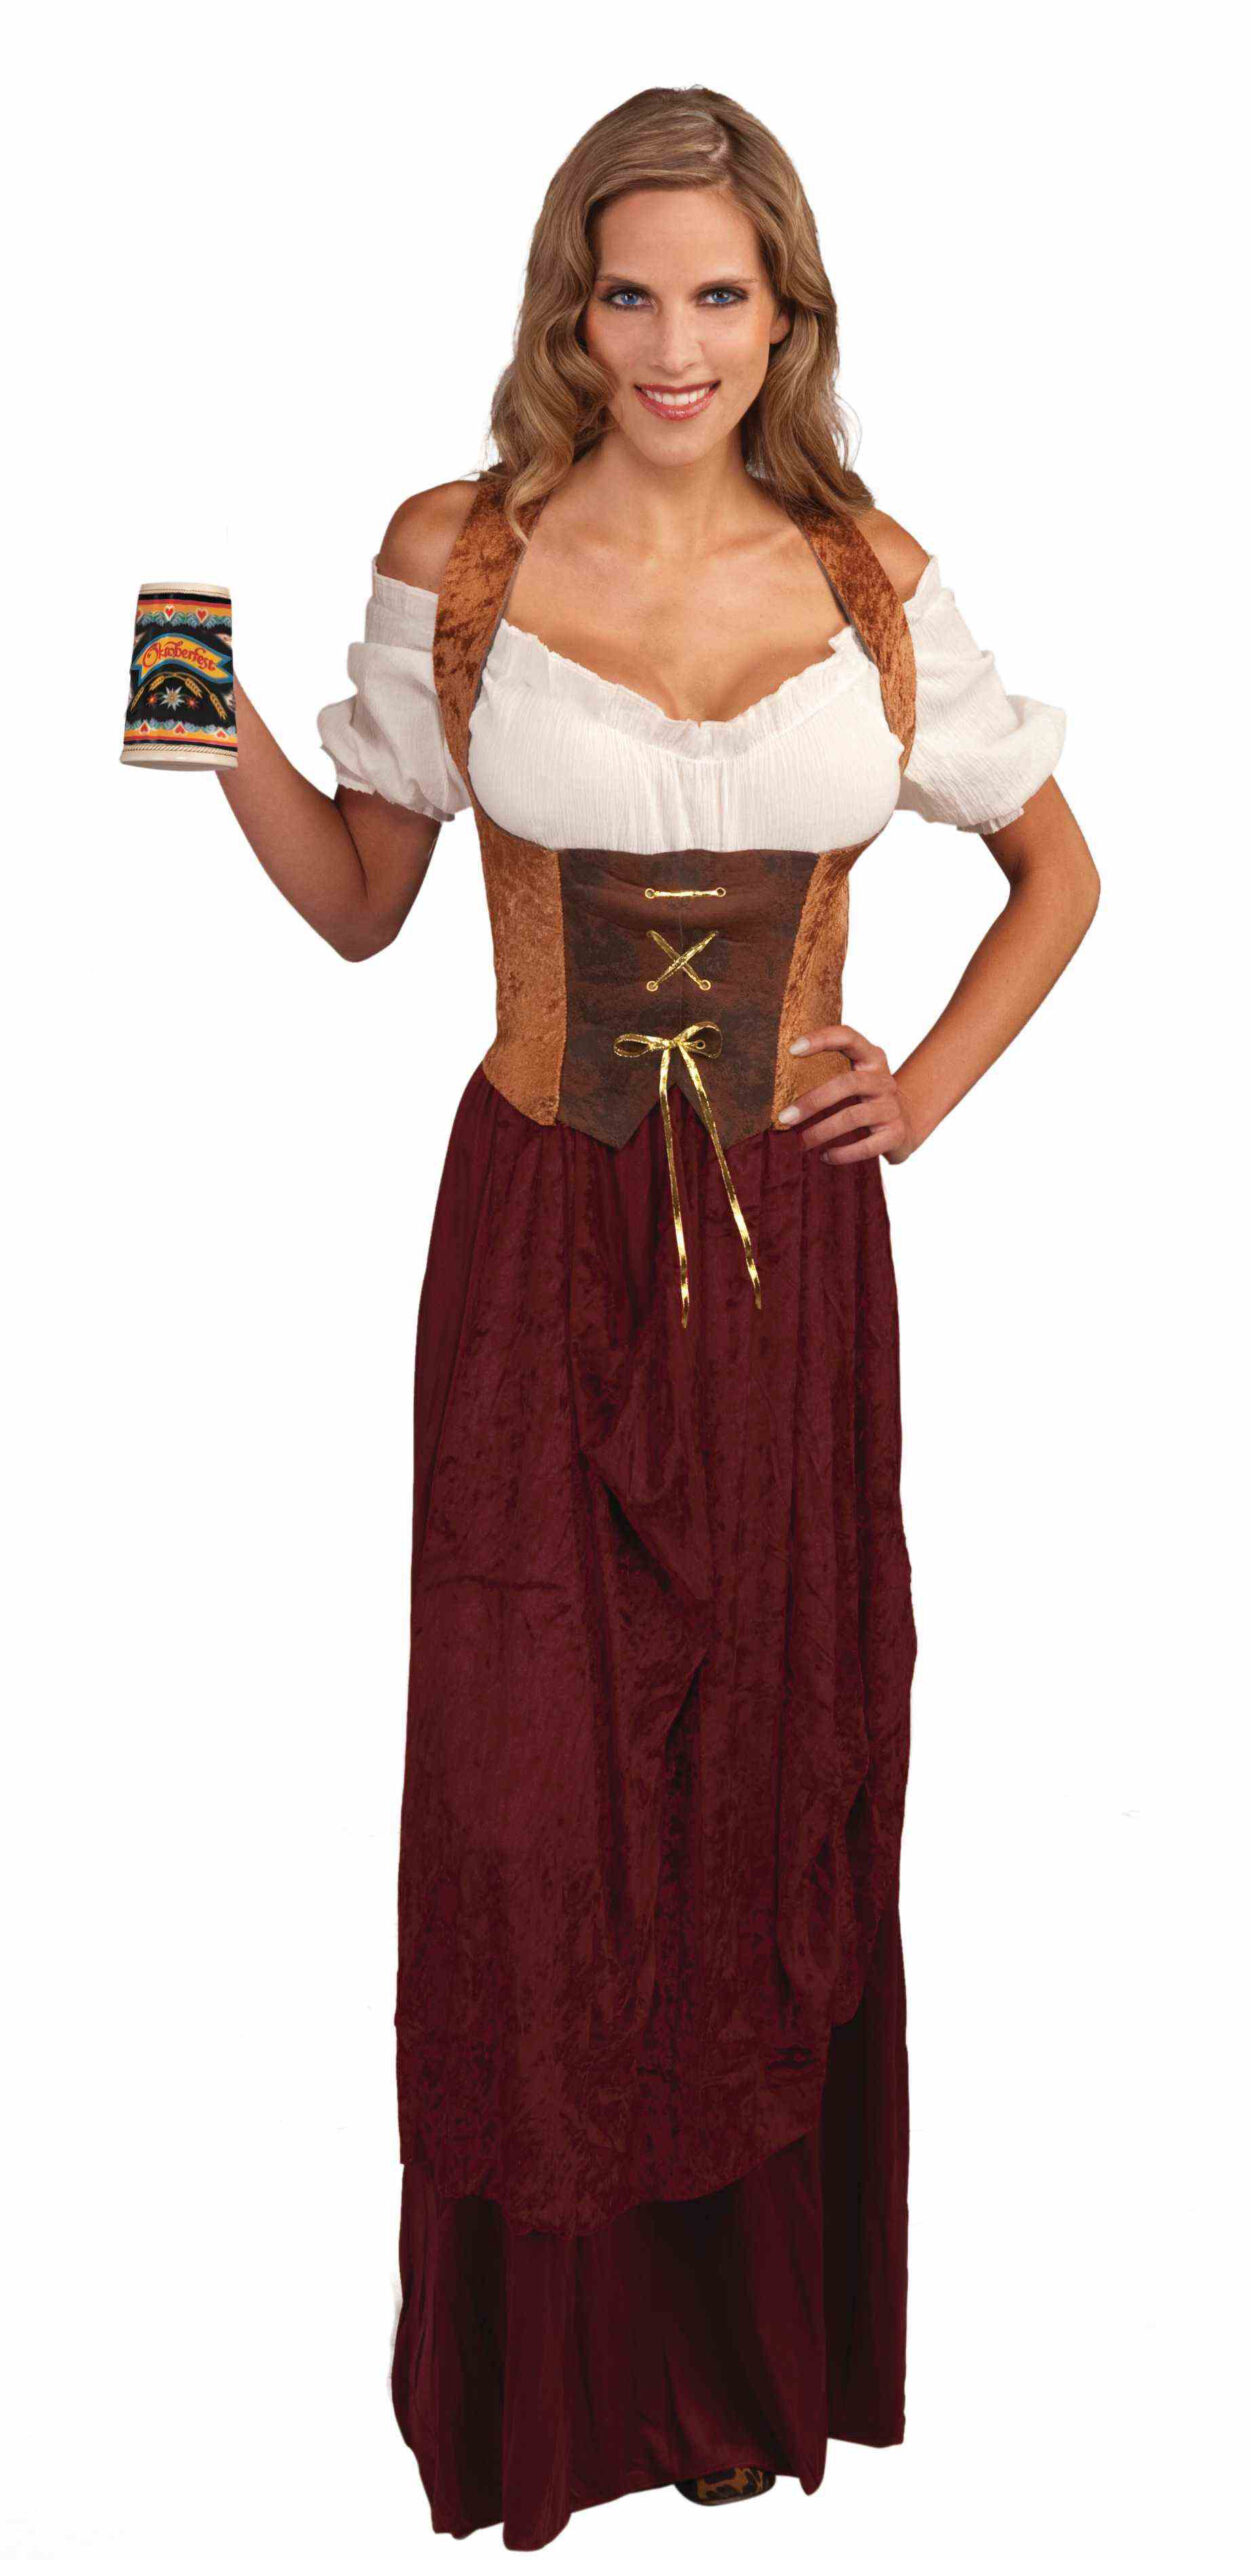 Corset Top – Beauty and the Beast Costumes, Chattanooga